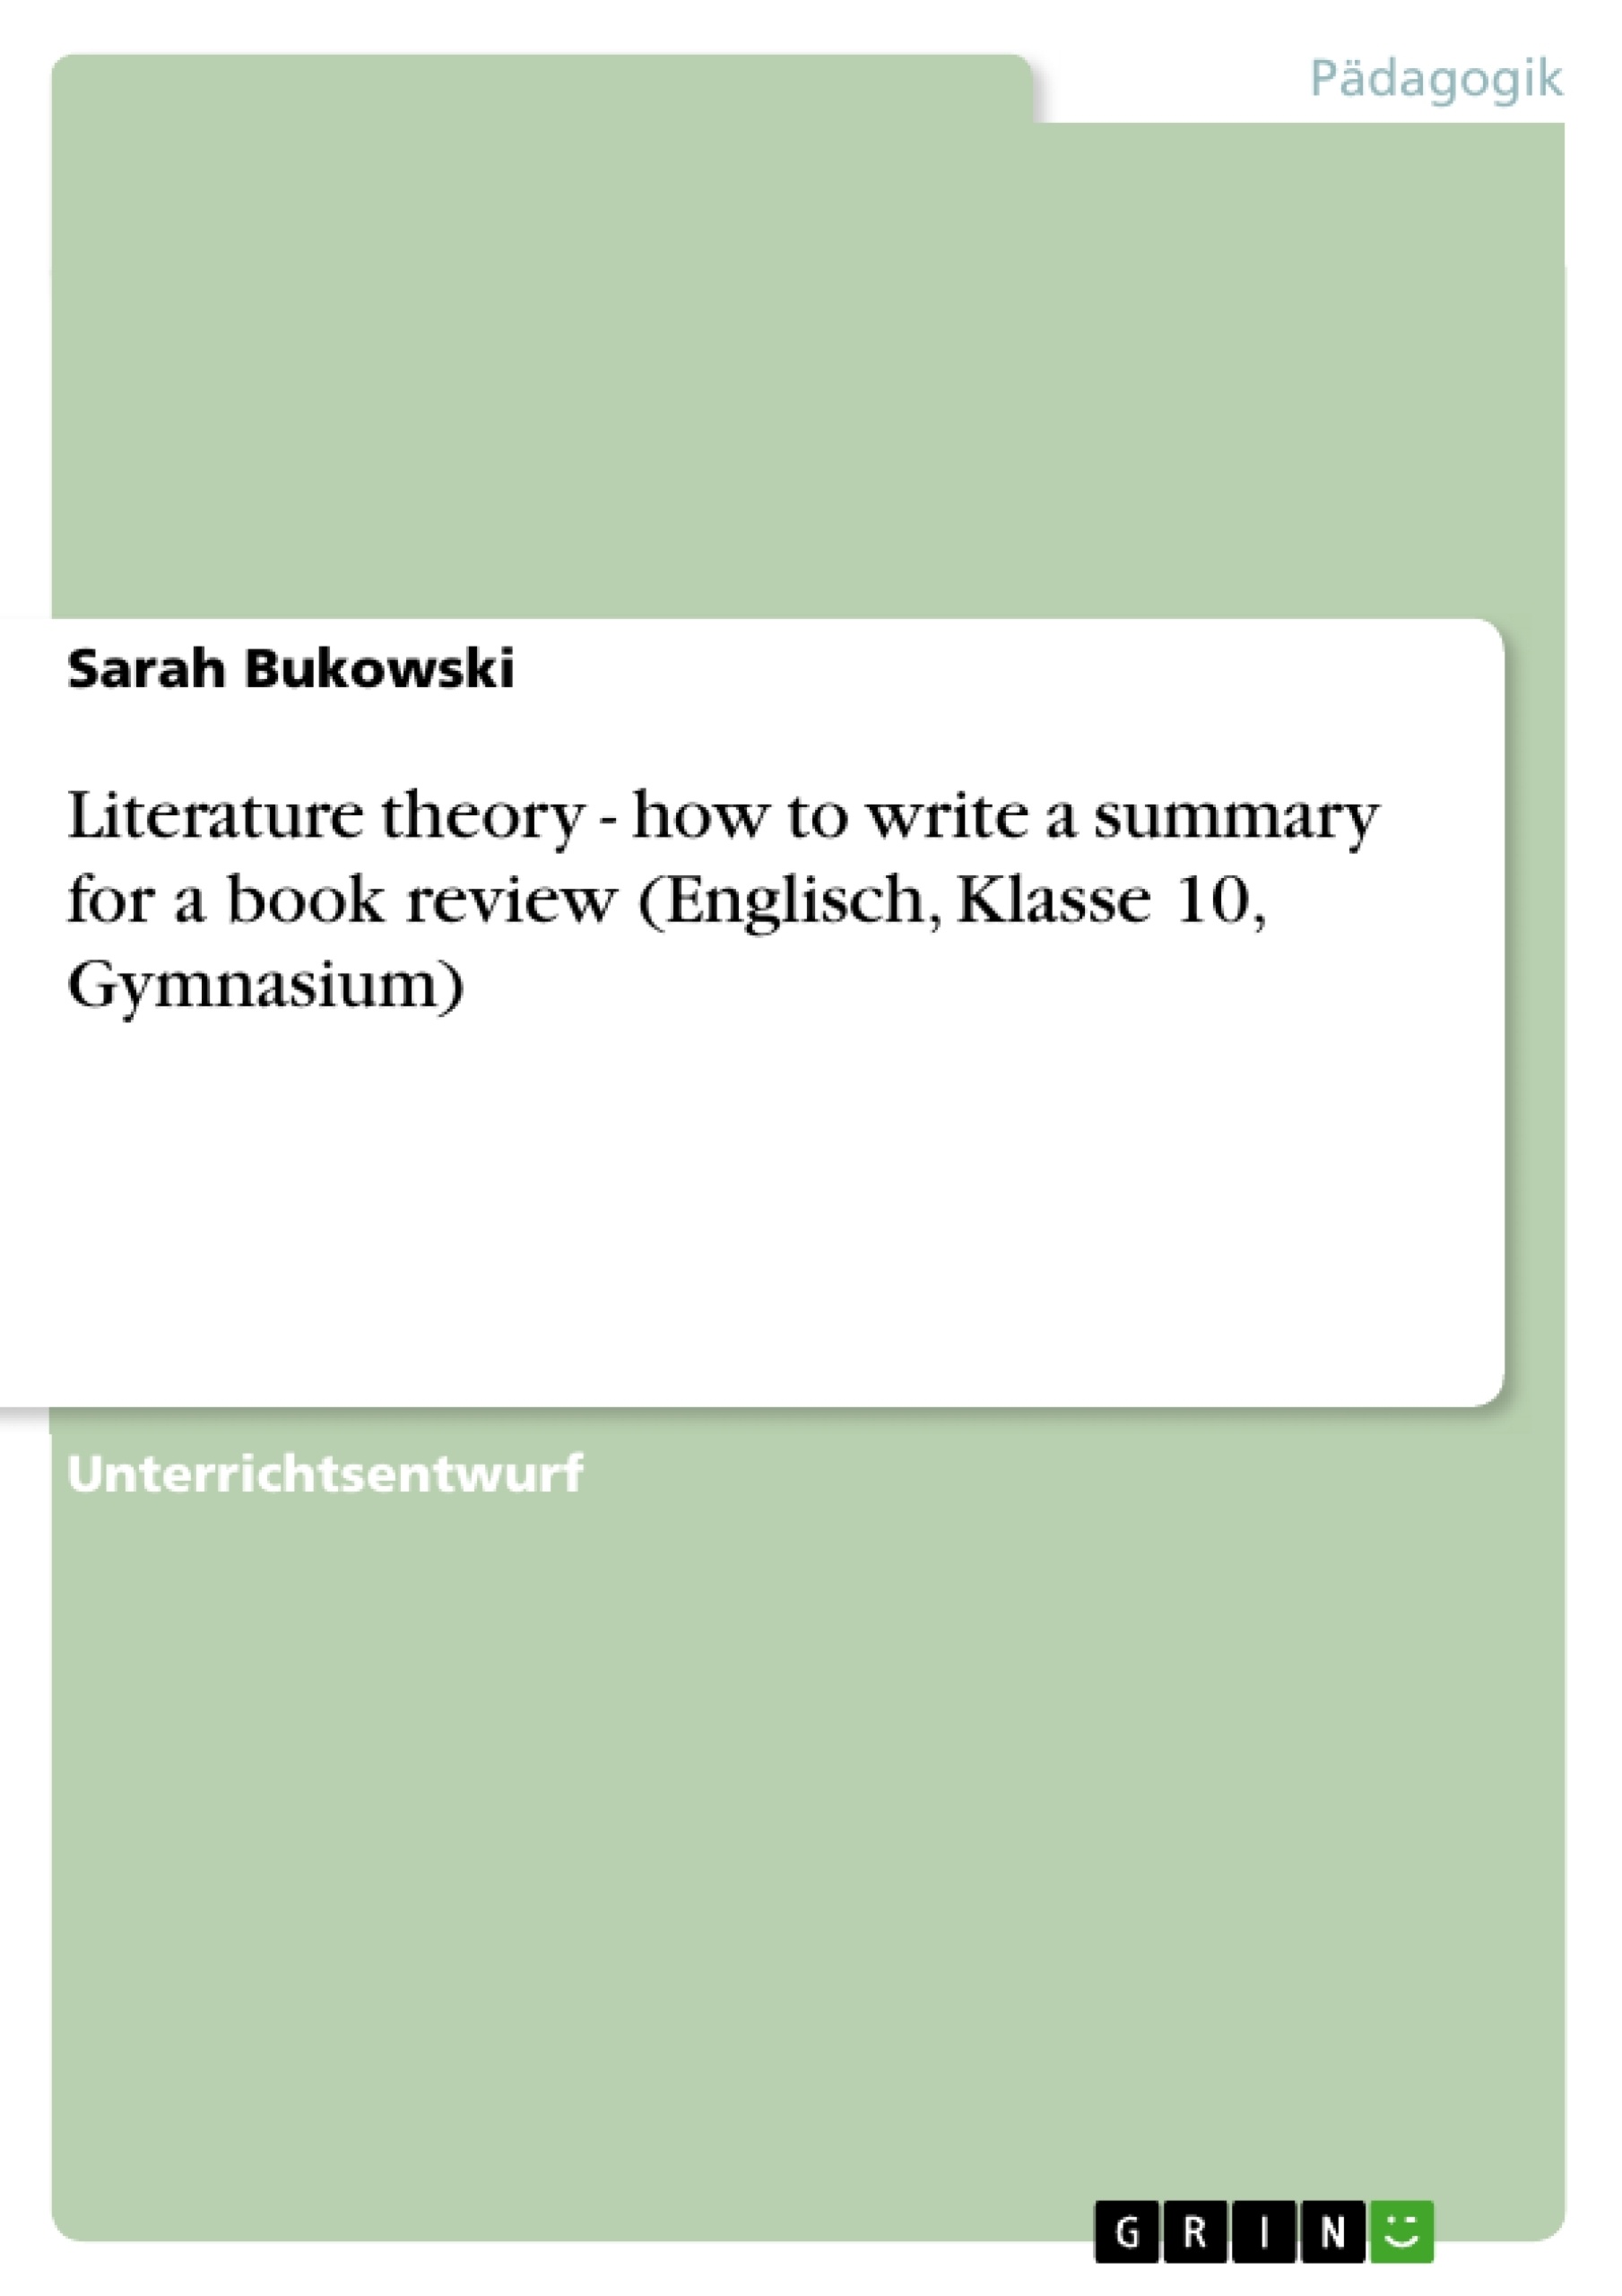 Titel: Literature theory - how to write a summary for a book review (Englisch, Klasse 10, Gymnasium)